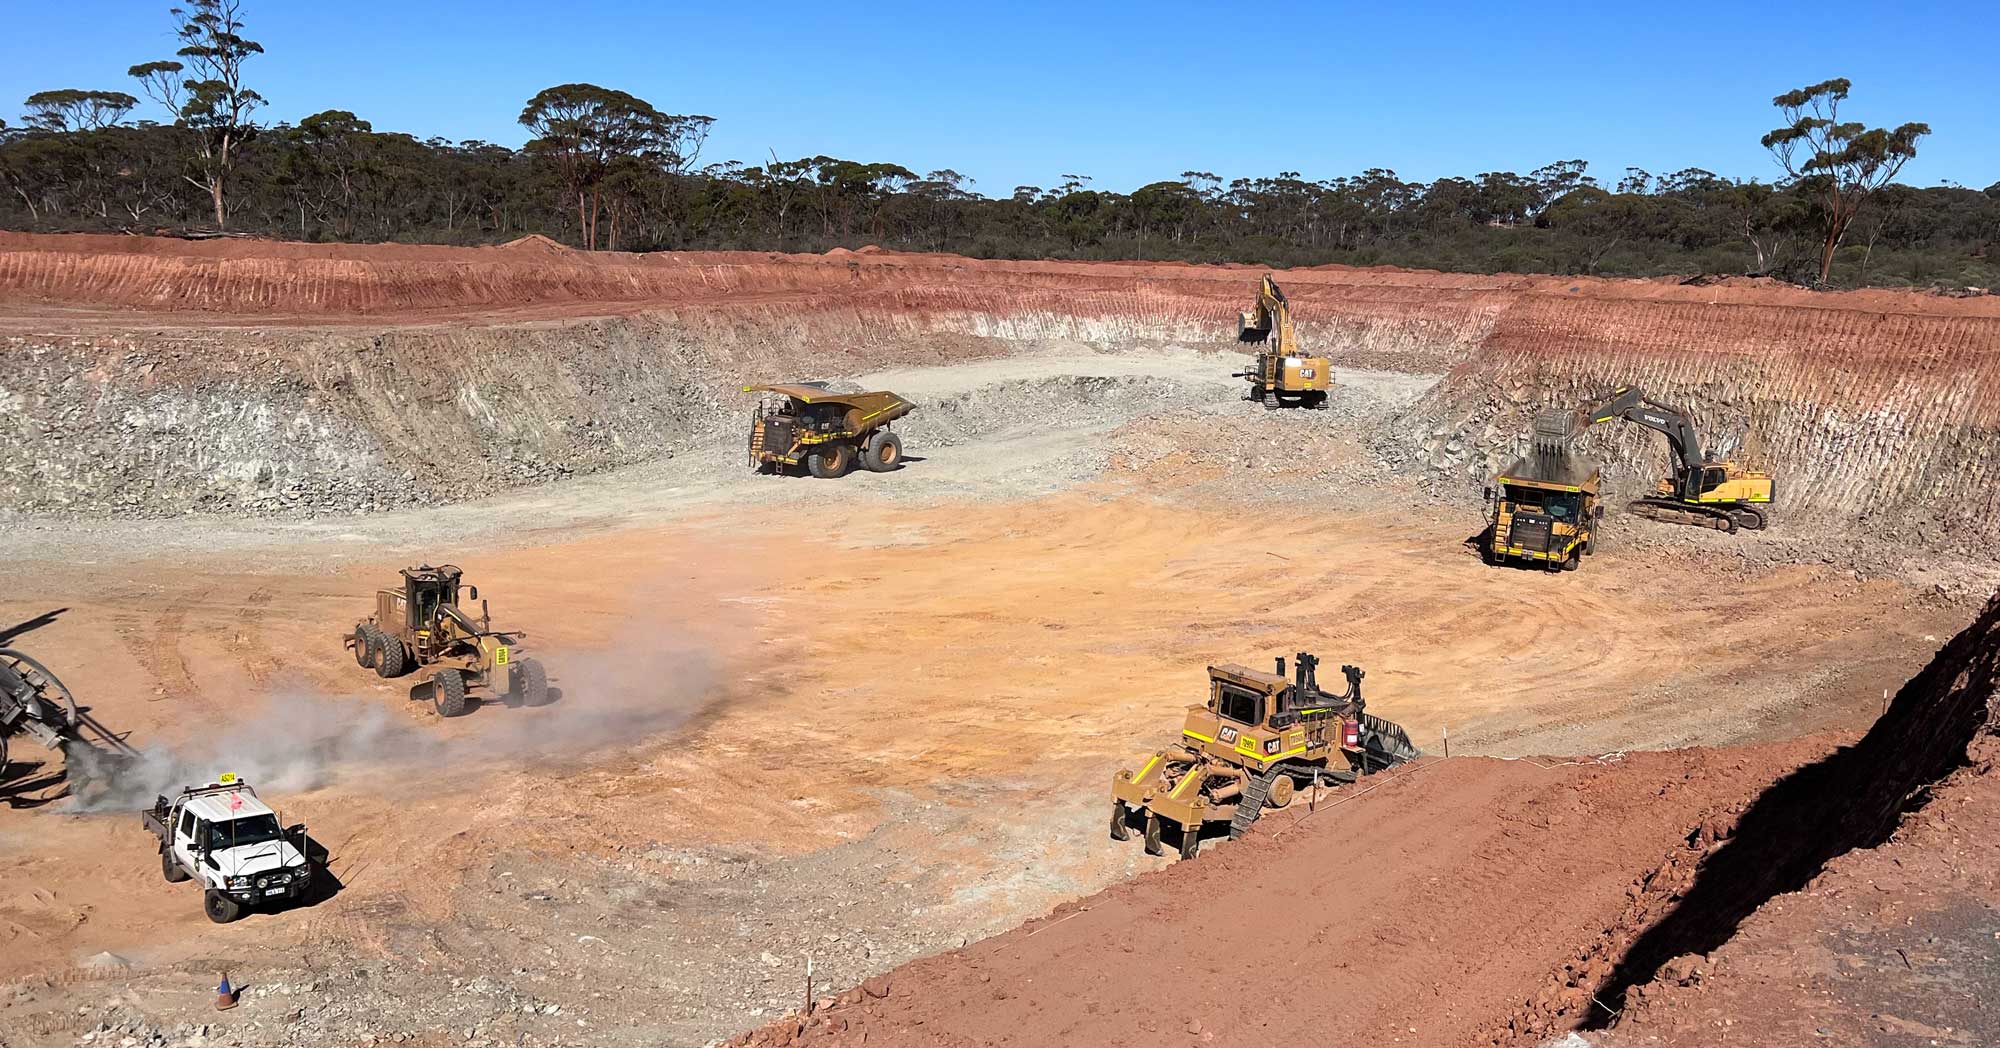 Mining contractors operating at a mine site. There are excavators, grader, haul trucks and more in operation at the site.